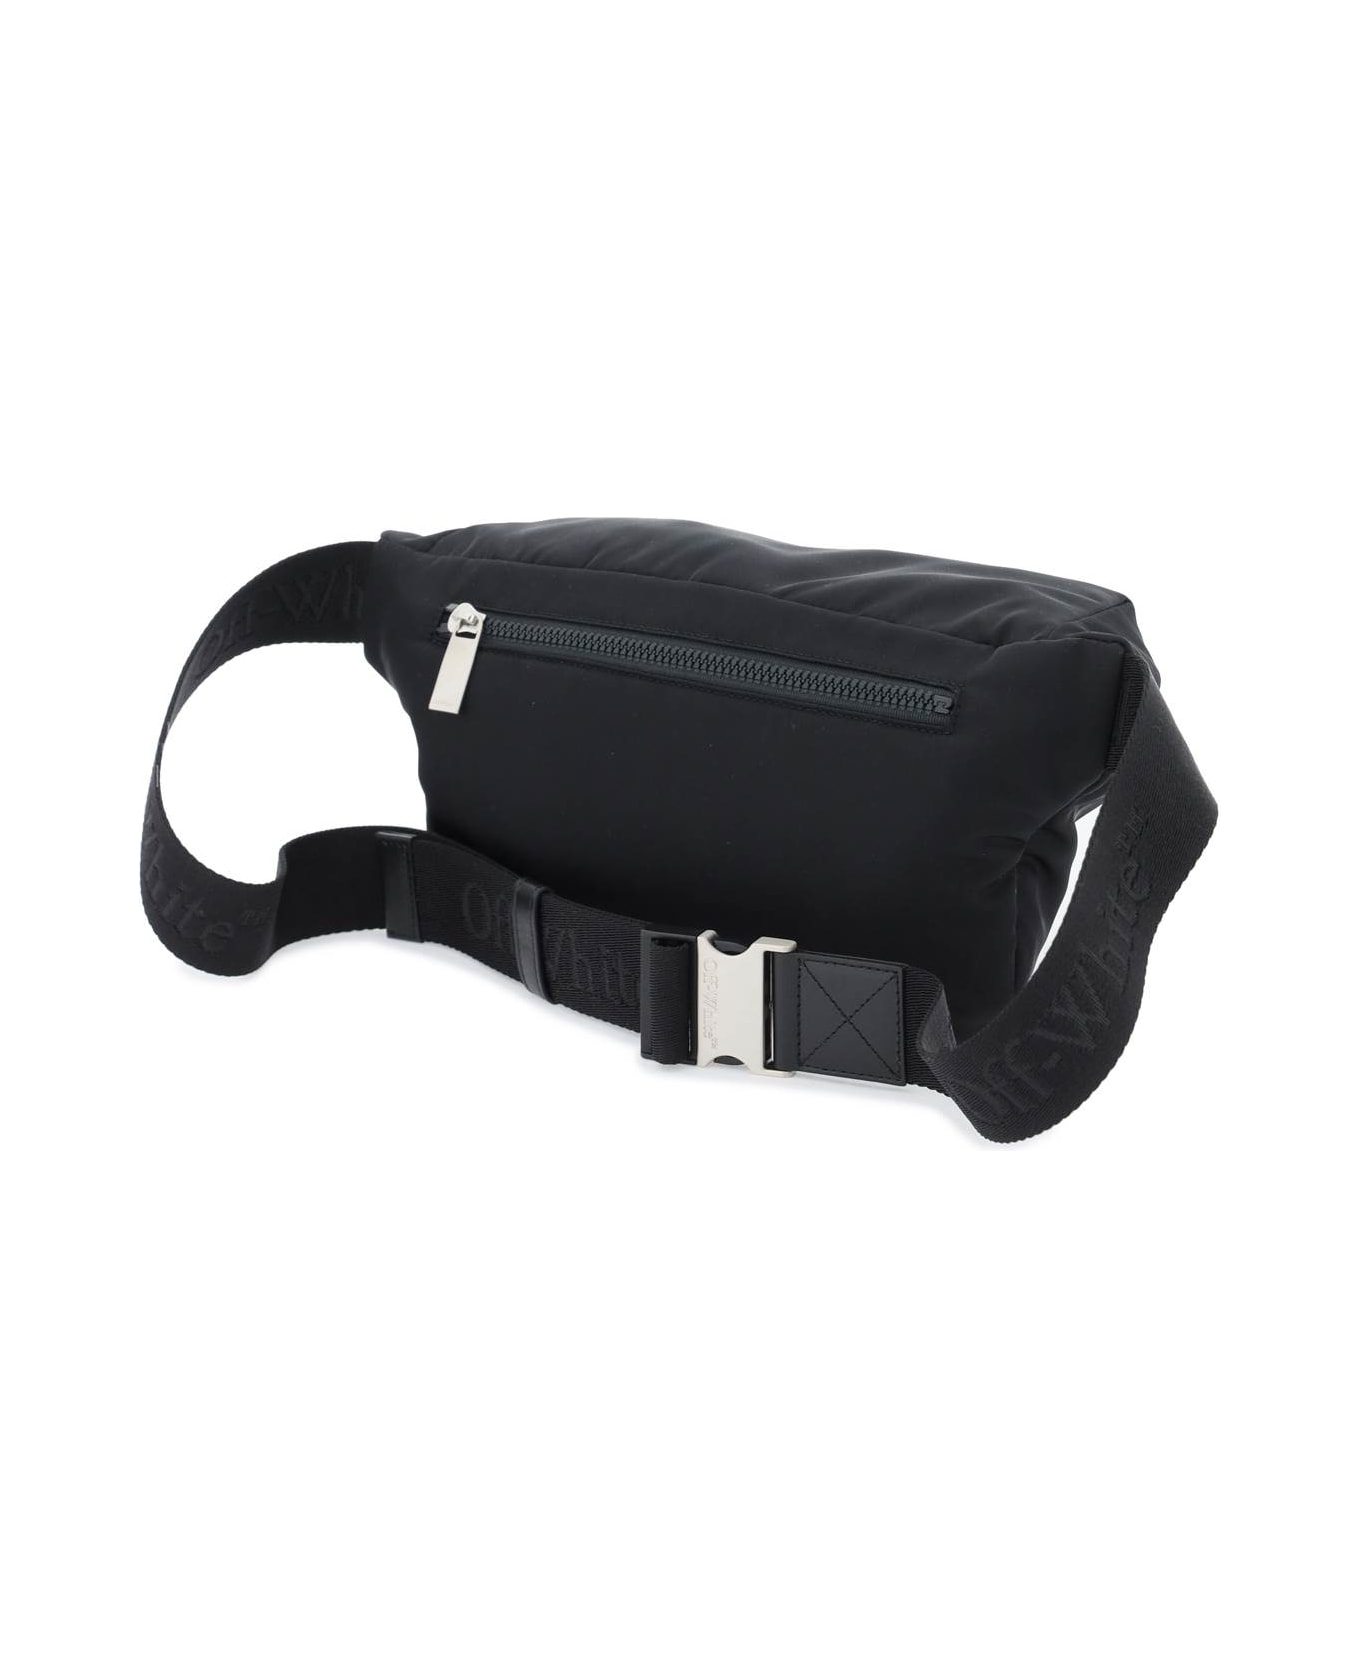 Off-White Technical Jersey Waist Pouch With Logo - Black No Color